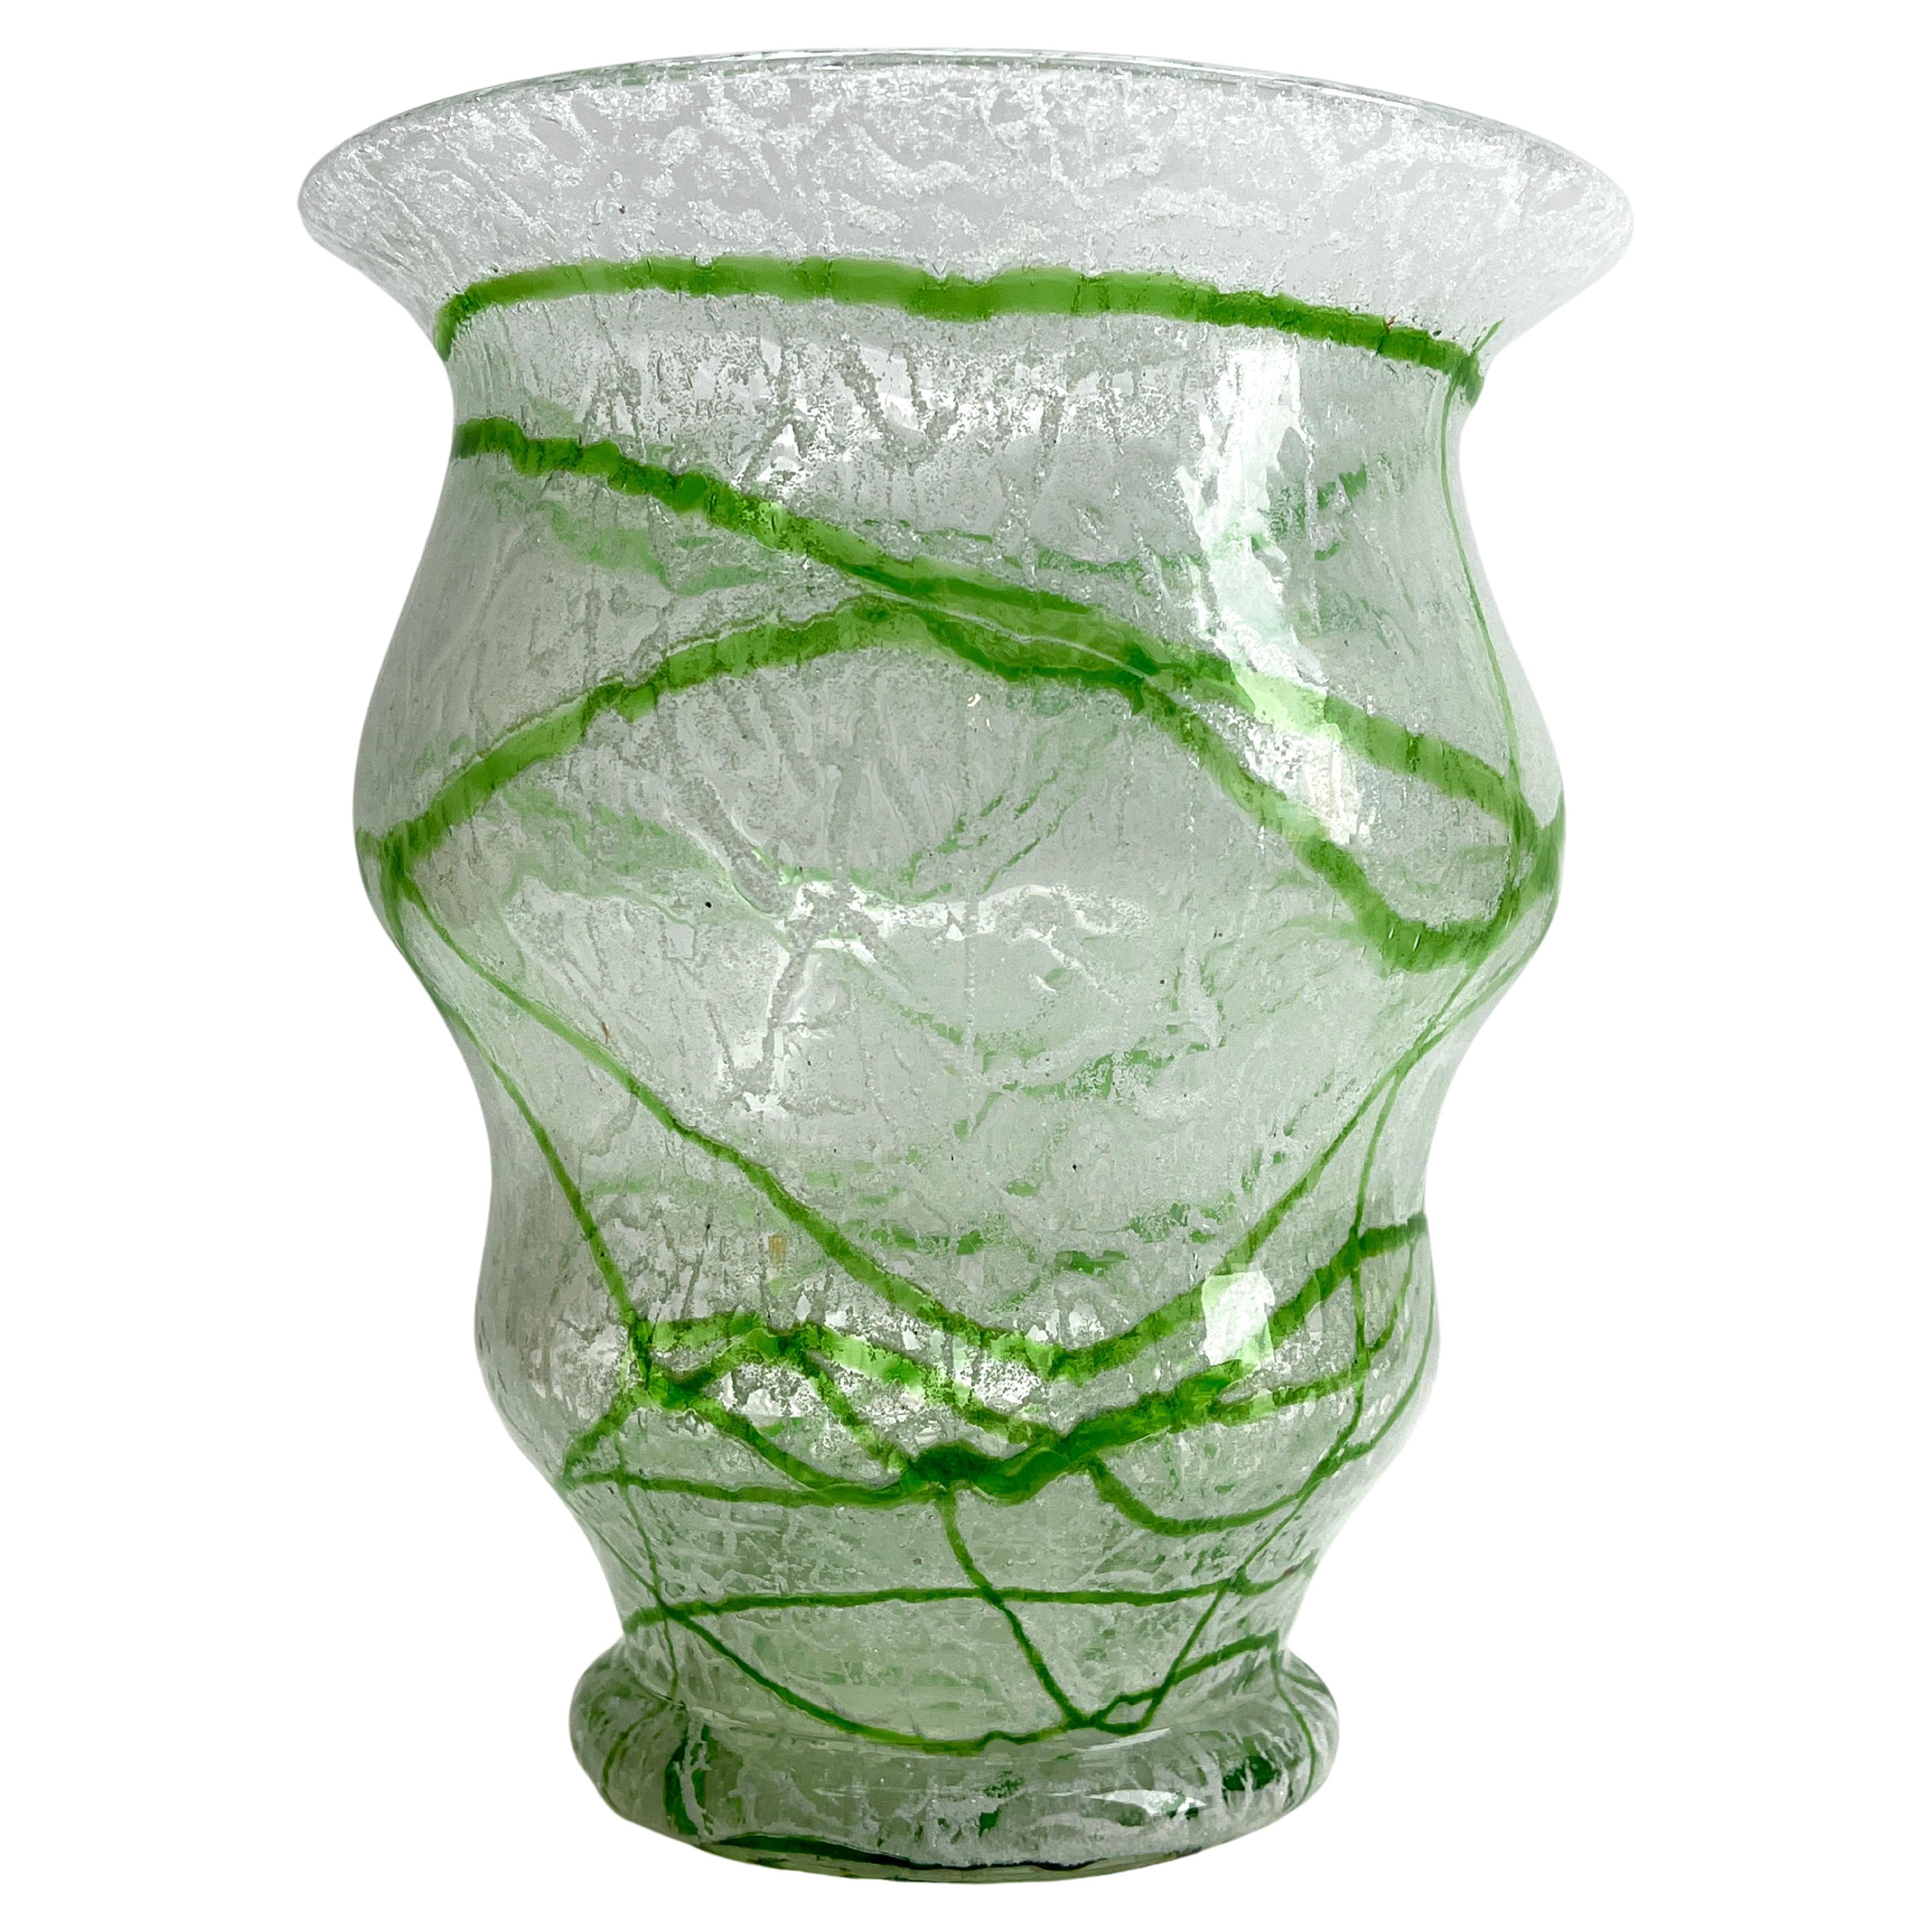 Foam glass vases. Loetz. Johann Loetz Witwe, Klostermühle, Around 1930s. 
Colorless glass with soda fusions in the intermediate layer, with rolled-in thread net of Green opal glass.

Loetz Art Nouveau Vase
Rare to find with original condition 

The